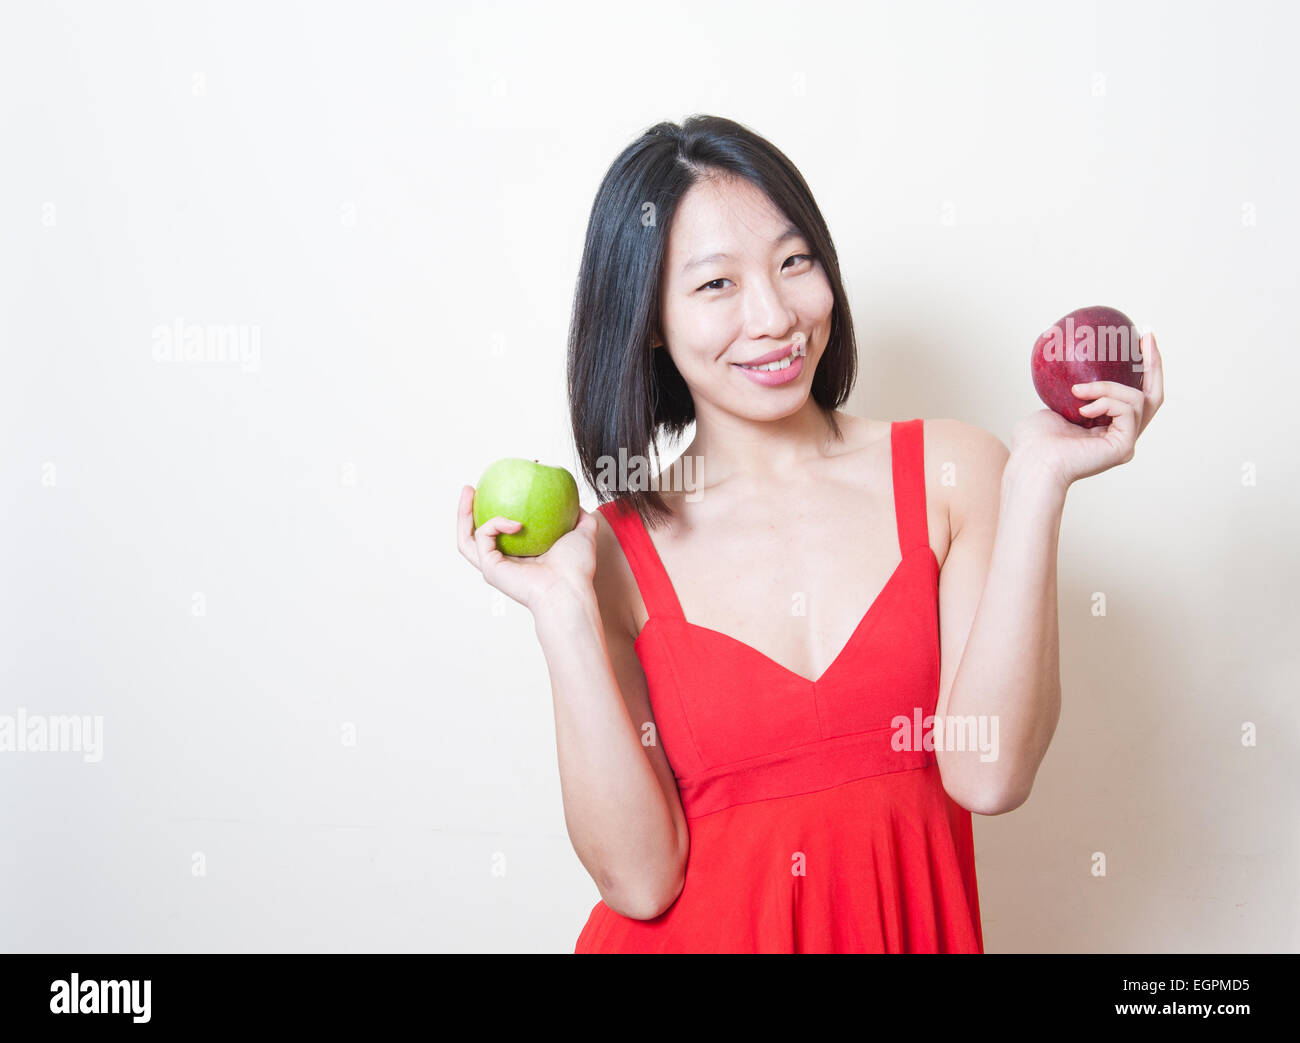 Young beautiful asian woman in red dress smiling and showing green and red apples on her hands on white background Stock Photo